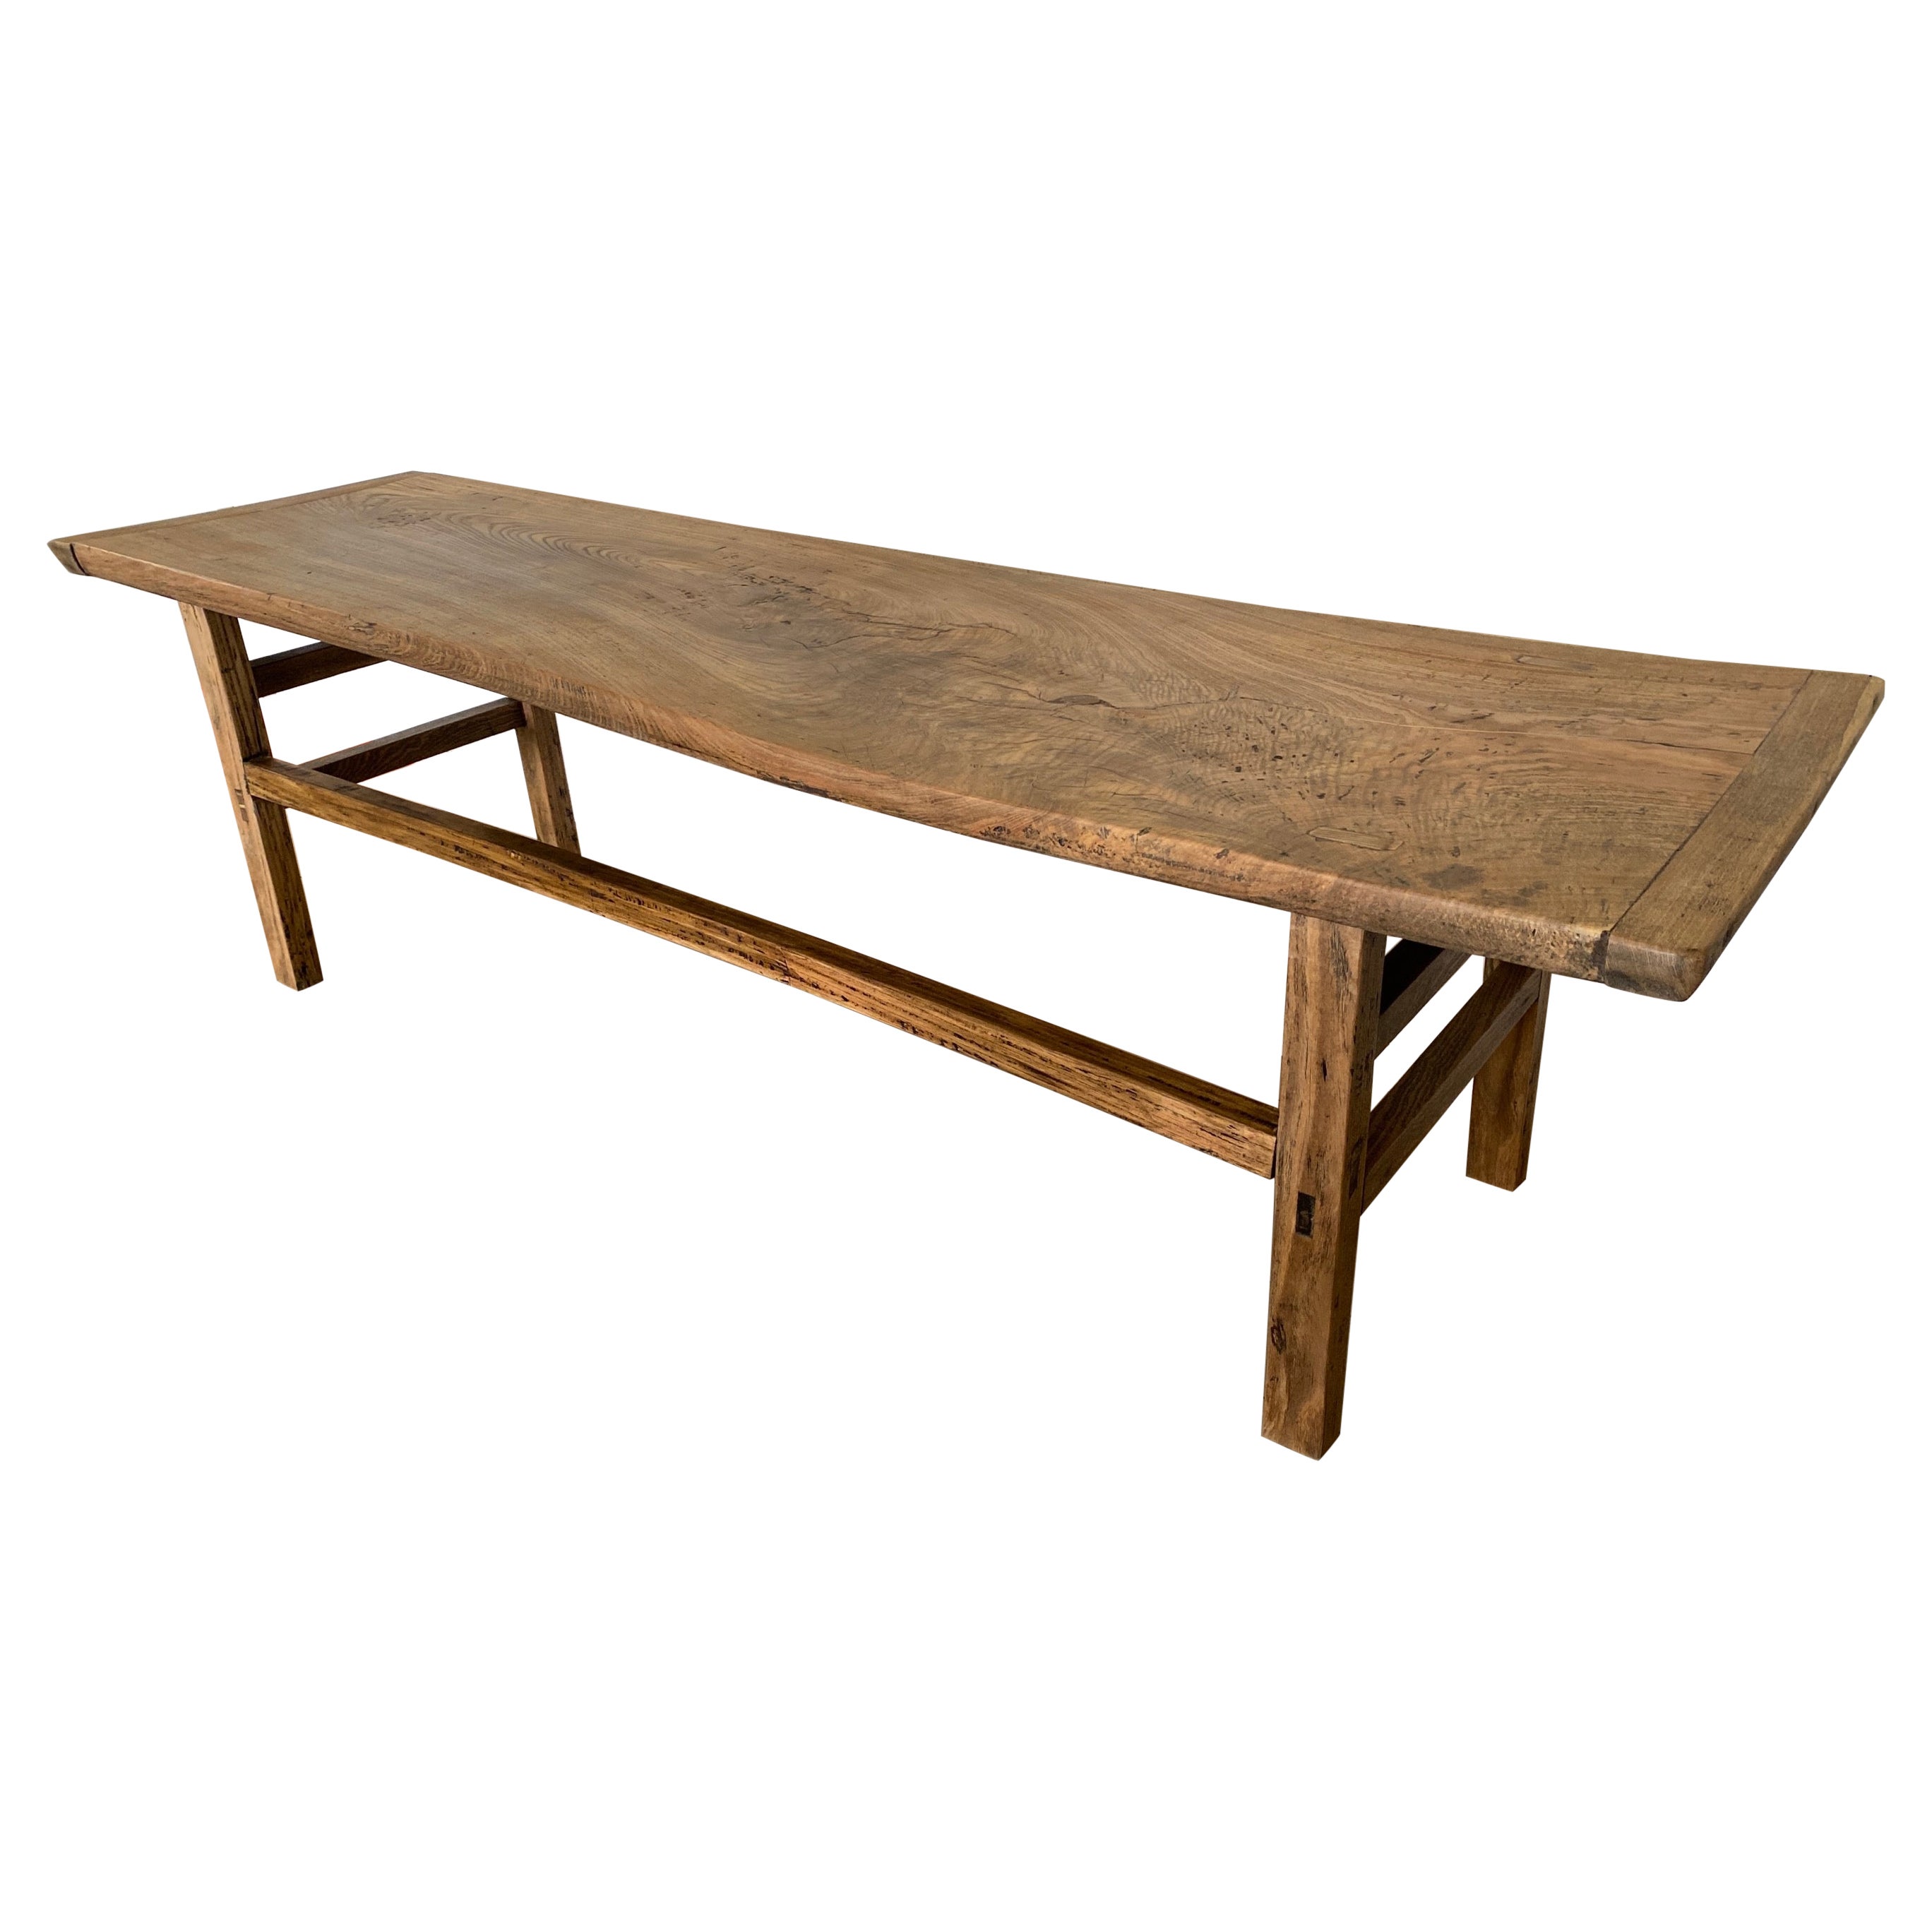 Rustic Asian Plank Top Coffee Table or Bench